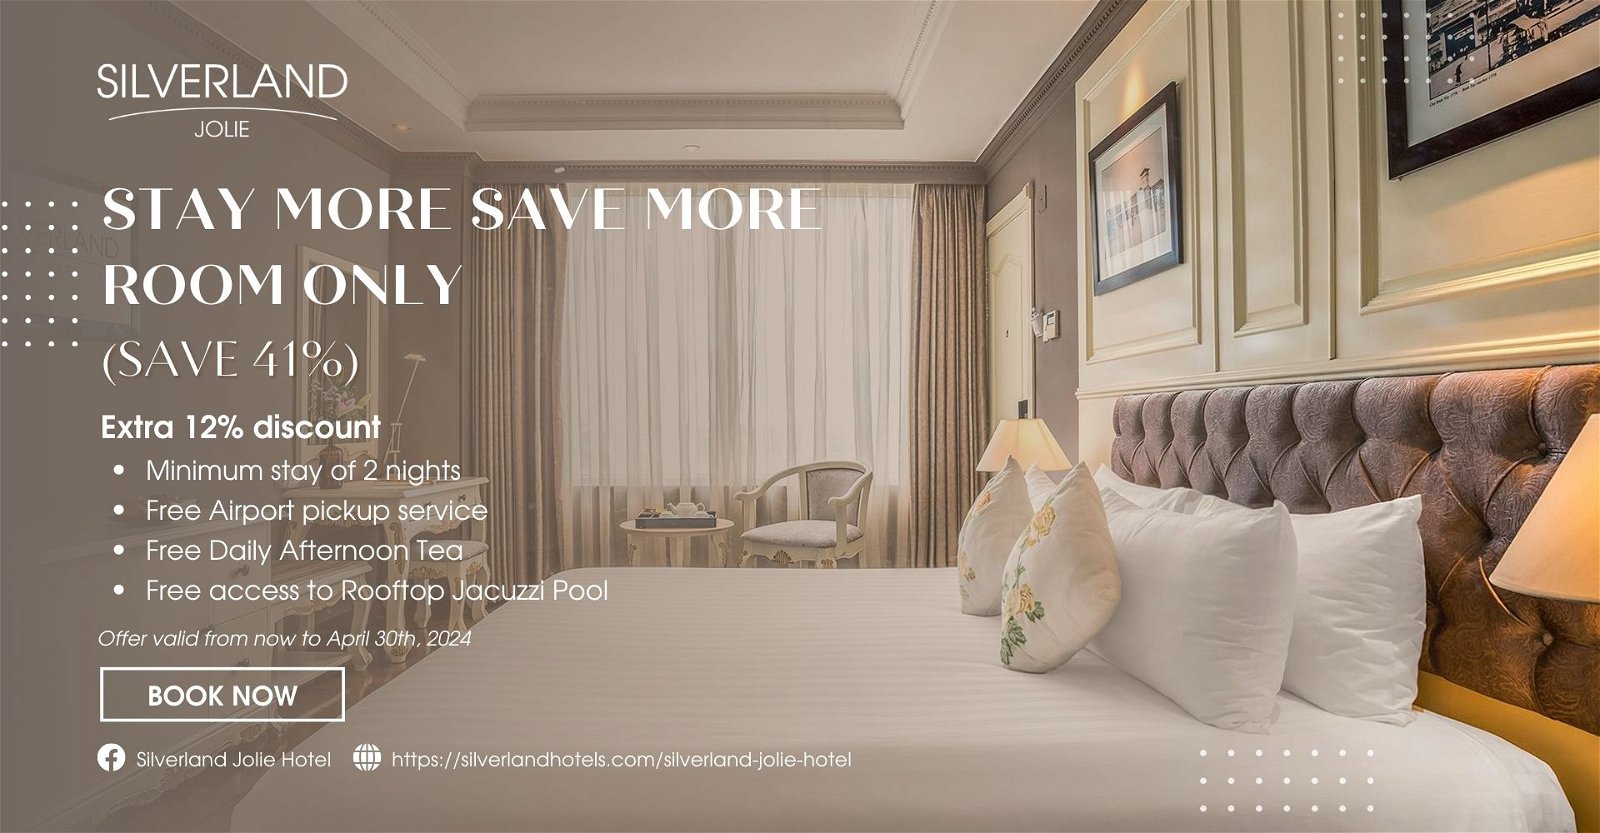 SILVERLAND JOLIE – STAY MORE SAVE MORE – ROOM ONLY (SAVE 41%)